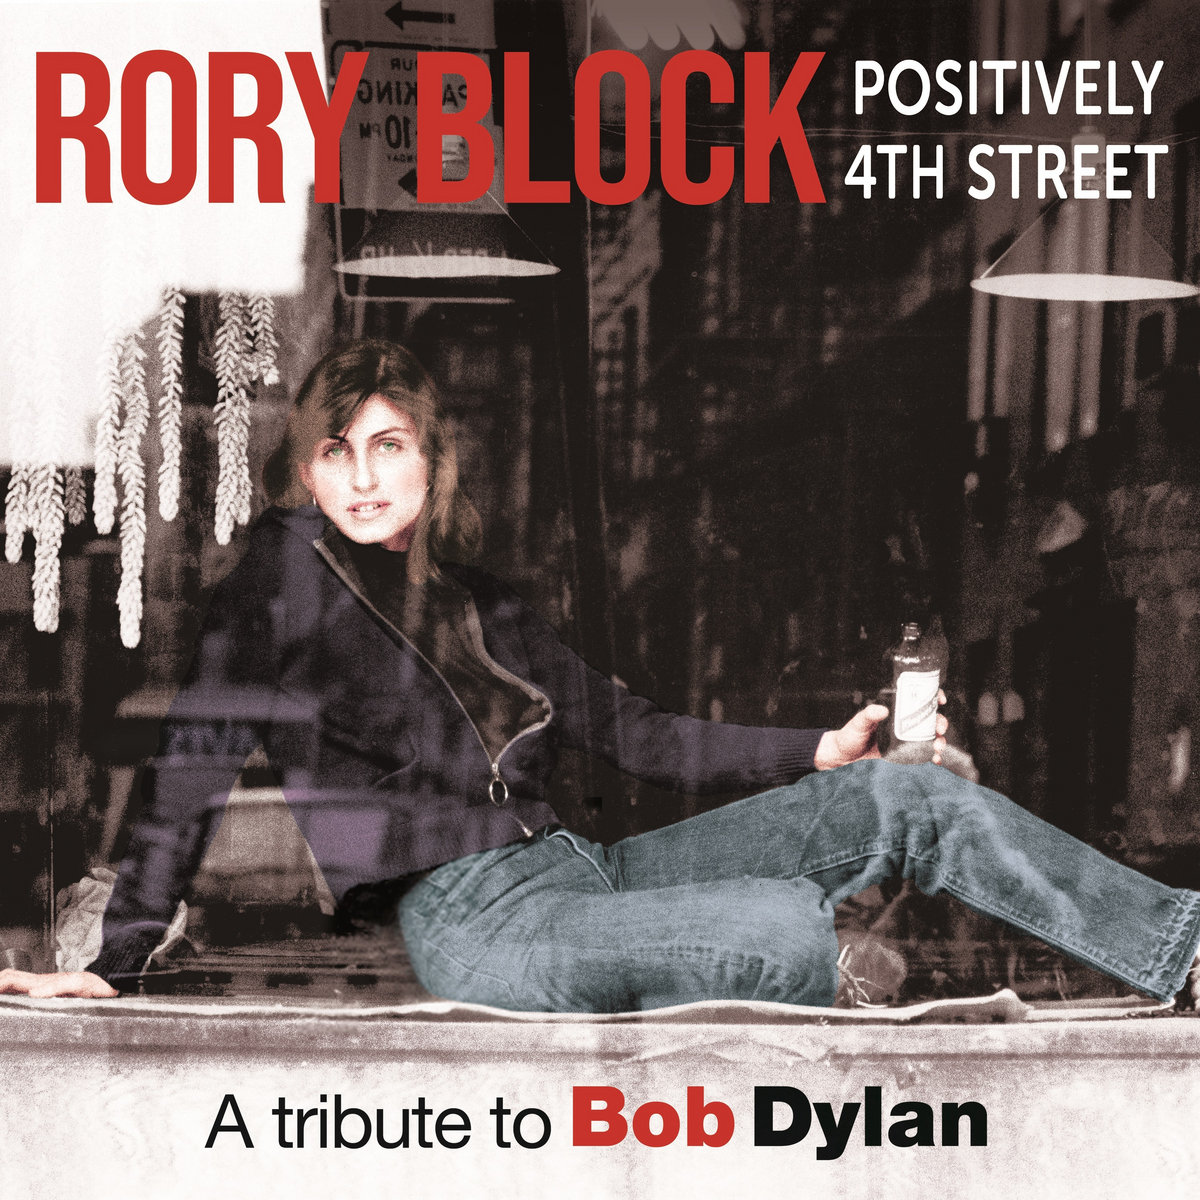 Rory-Block-Positively-4th-Street